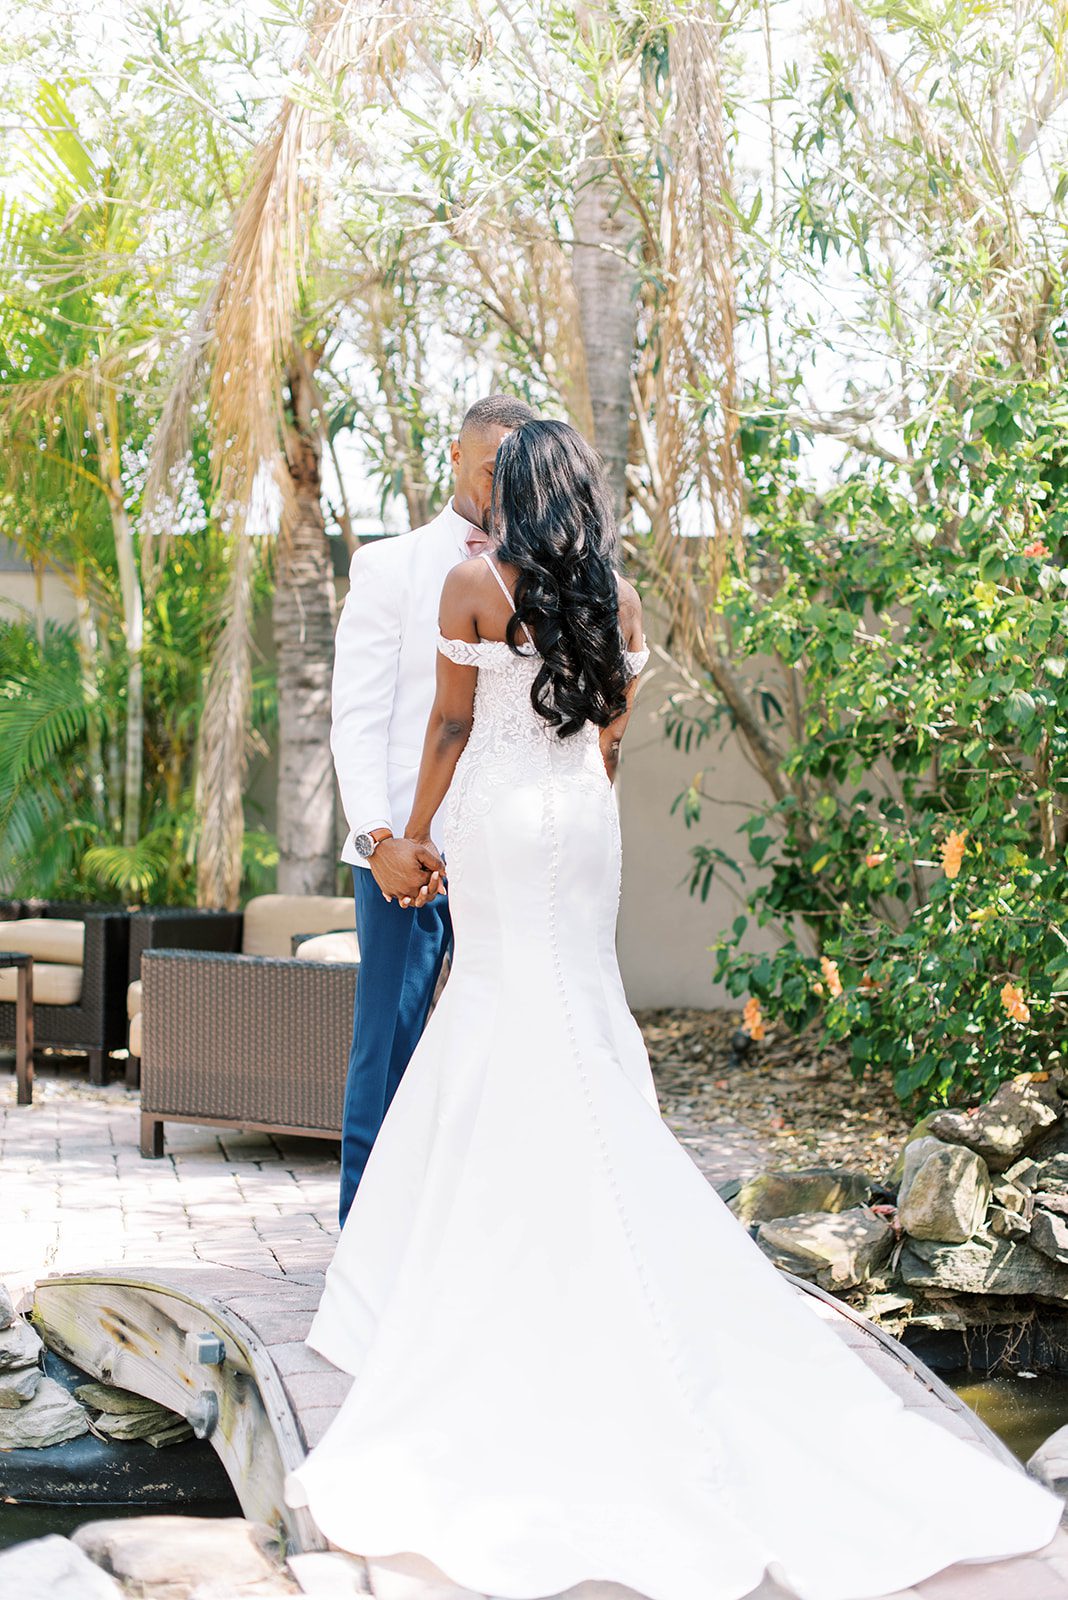 brides back is to the camera with her train extended while holding her grooms hands and kissing his at their Tampa Florida Wedding at their Bayanihan Arts and Events Center wedding venue